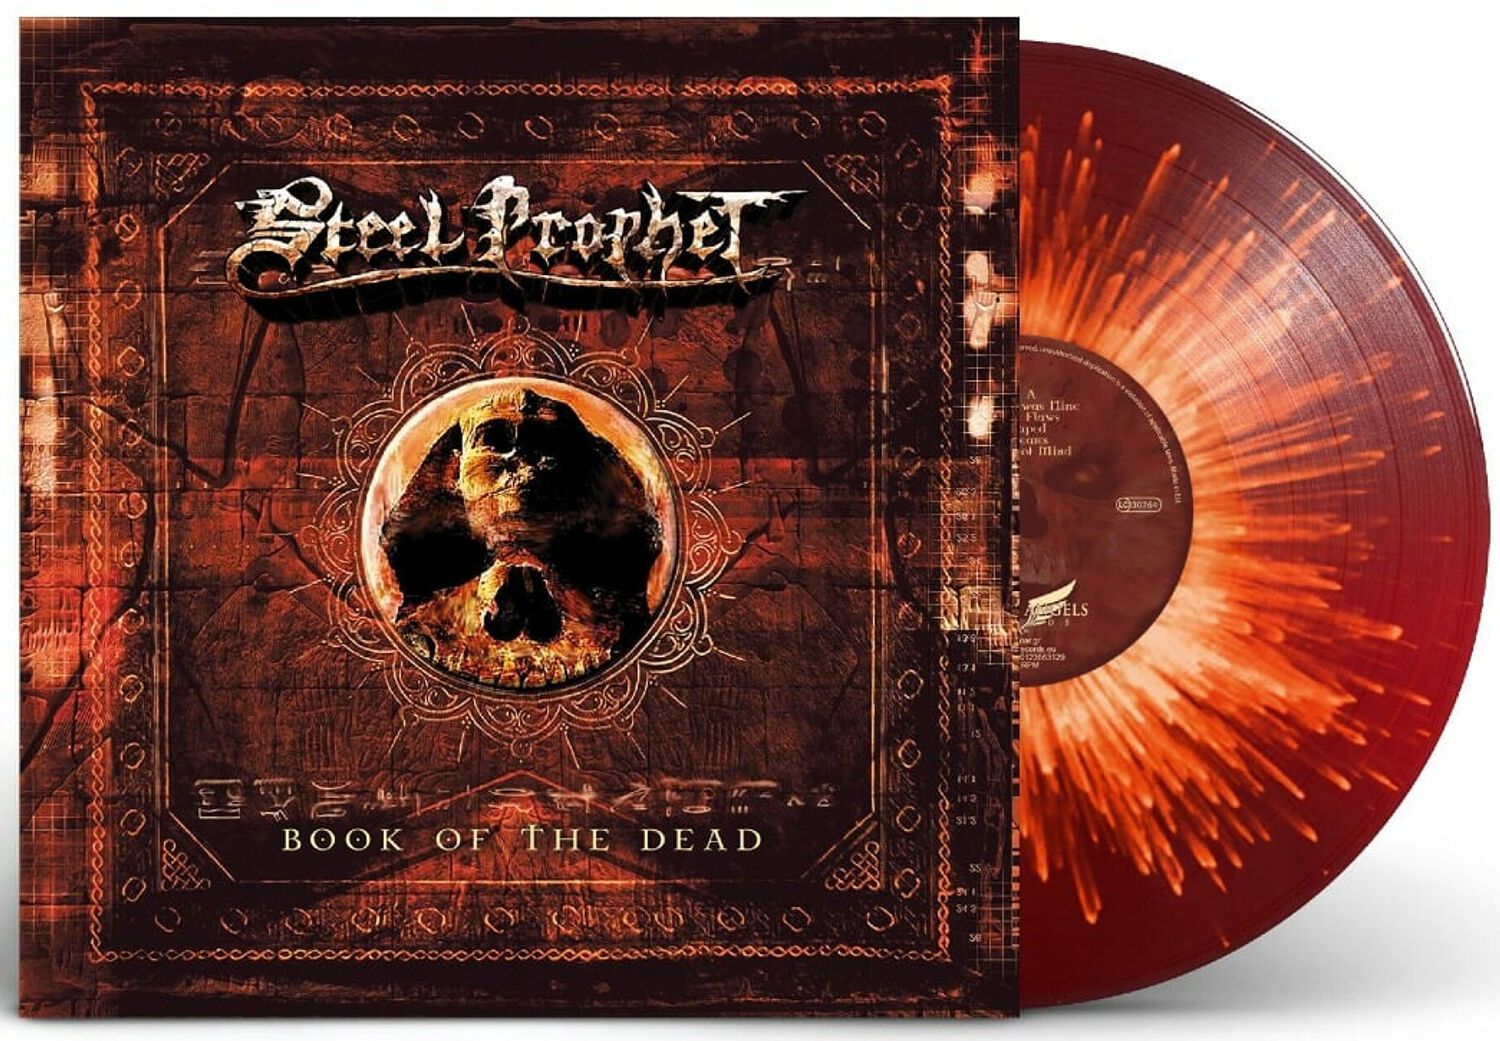 Image of Steel Prophet Book of the dead - 20 years LP farbig